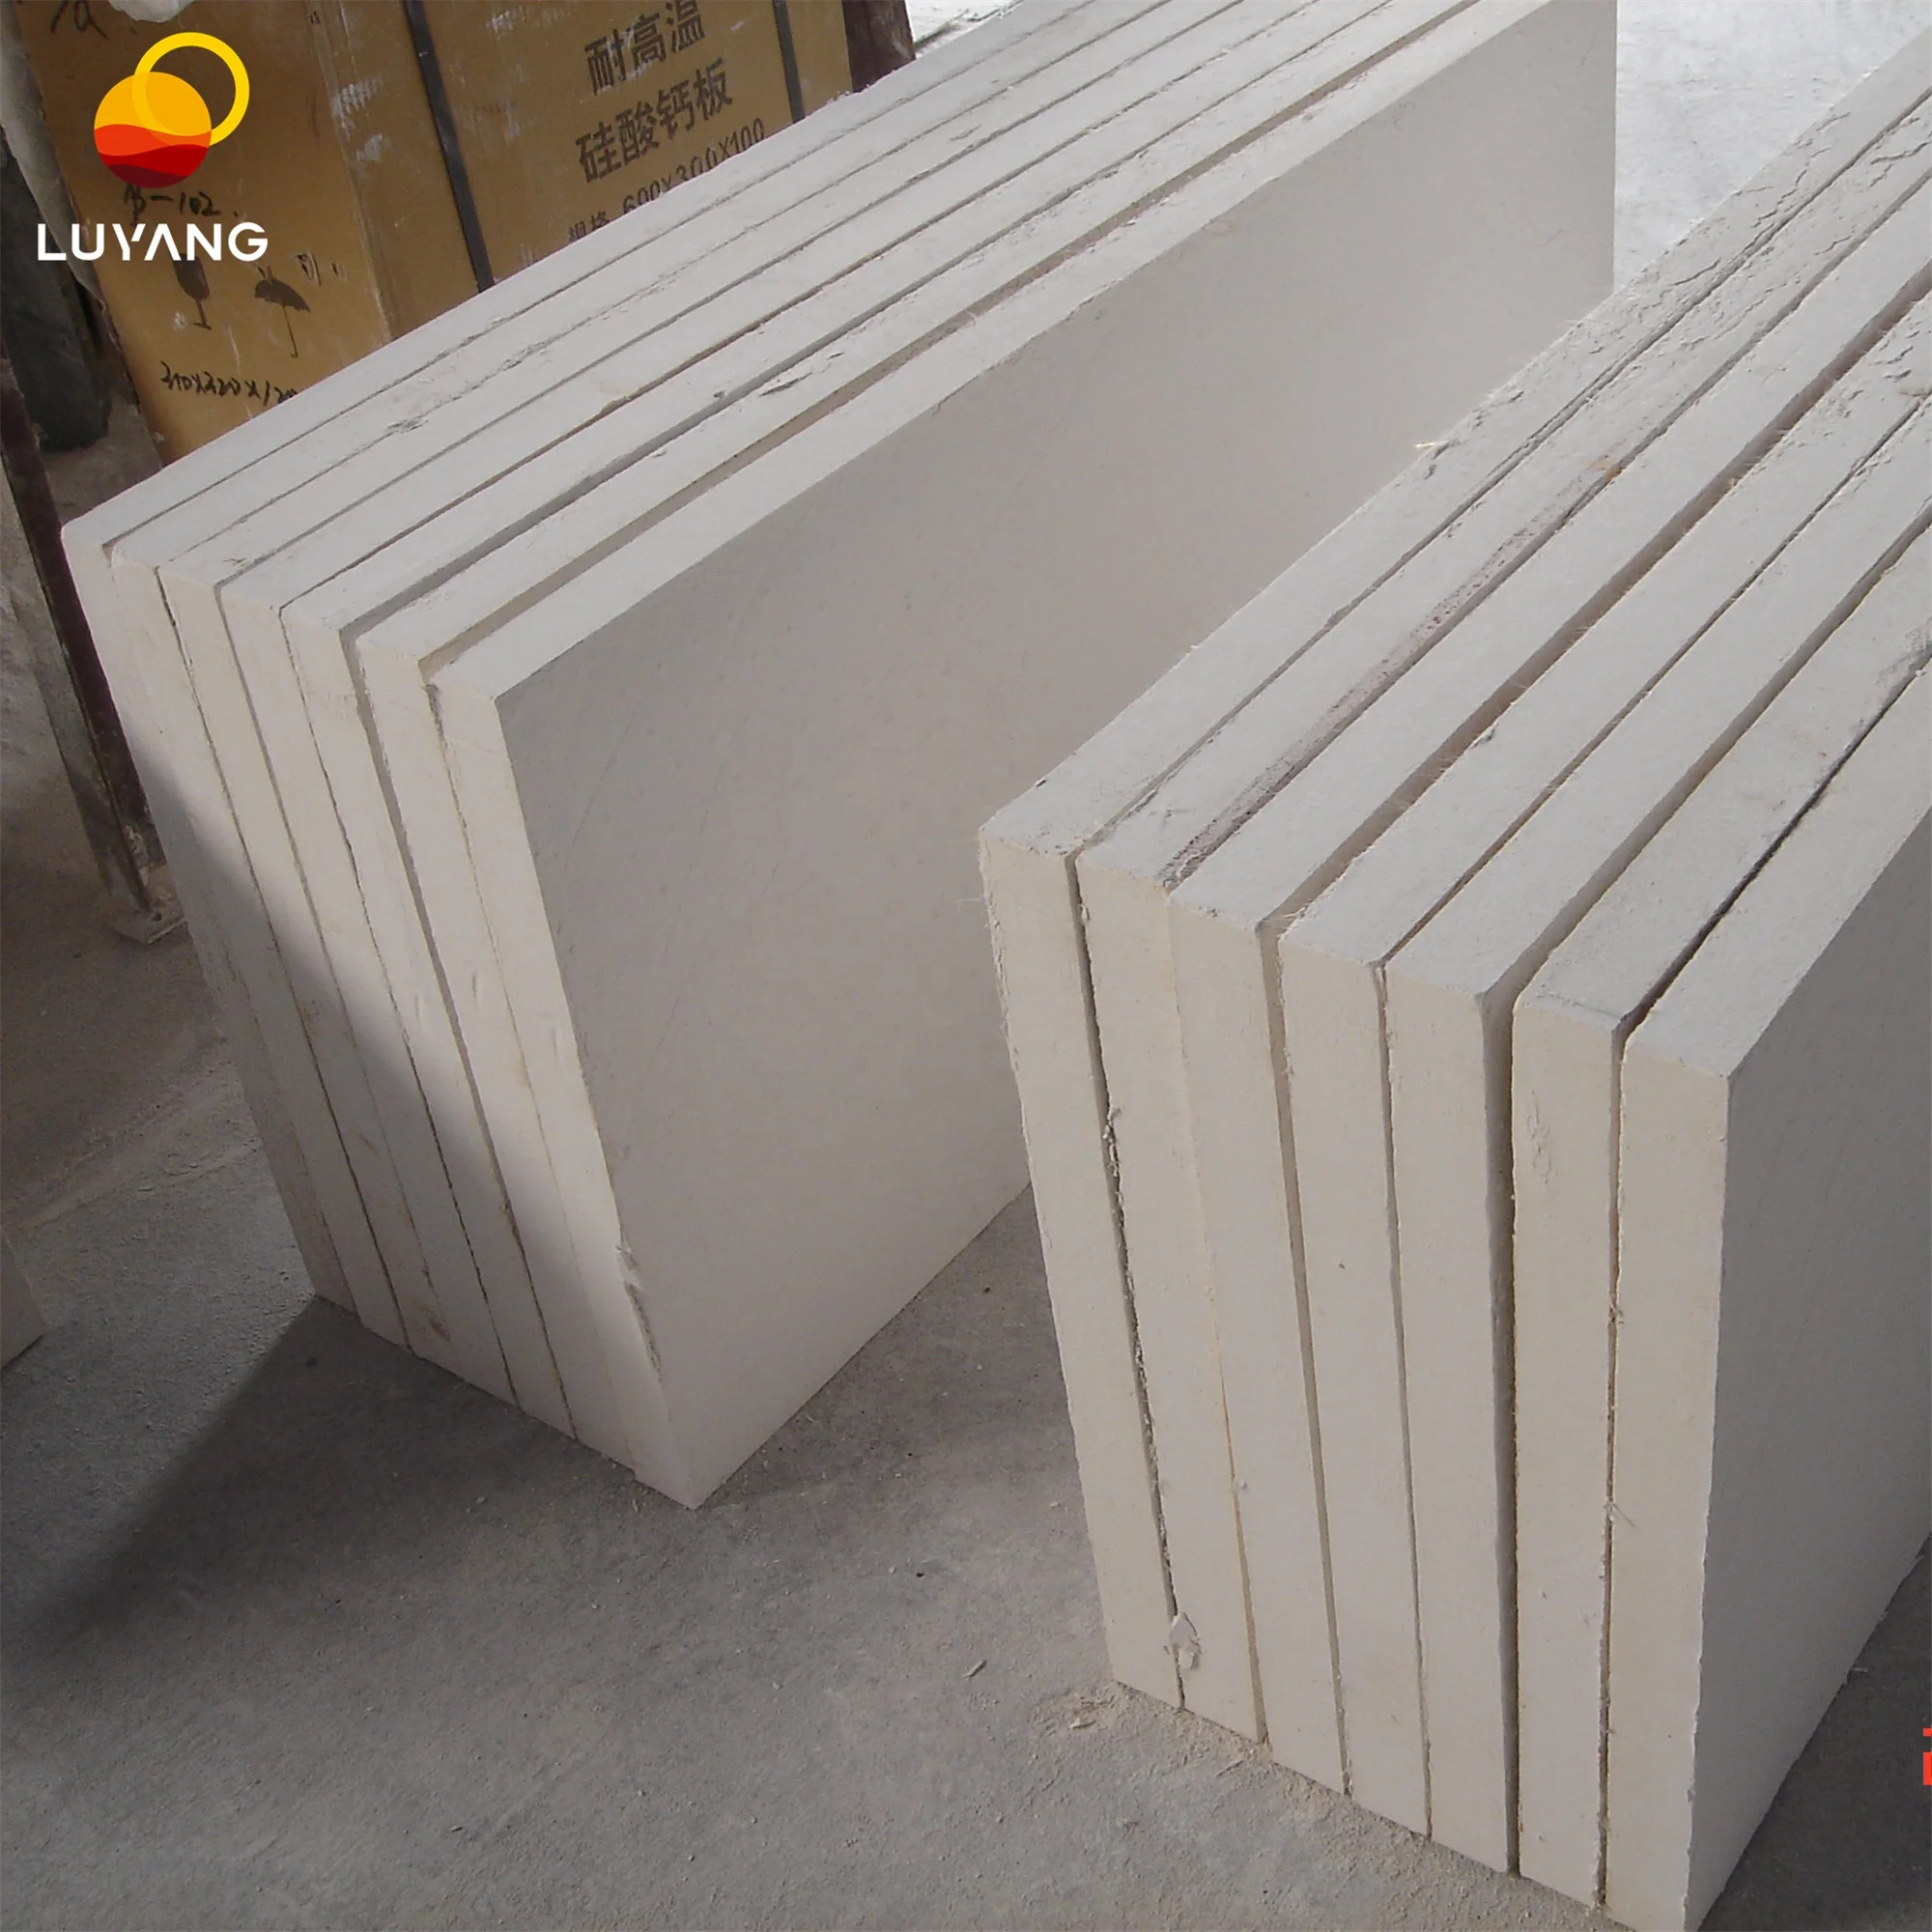 LUYANG Fire resistant High Strength 650 Degree Insulation Calcium Silicate Board